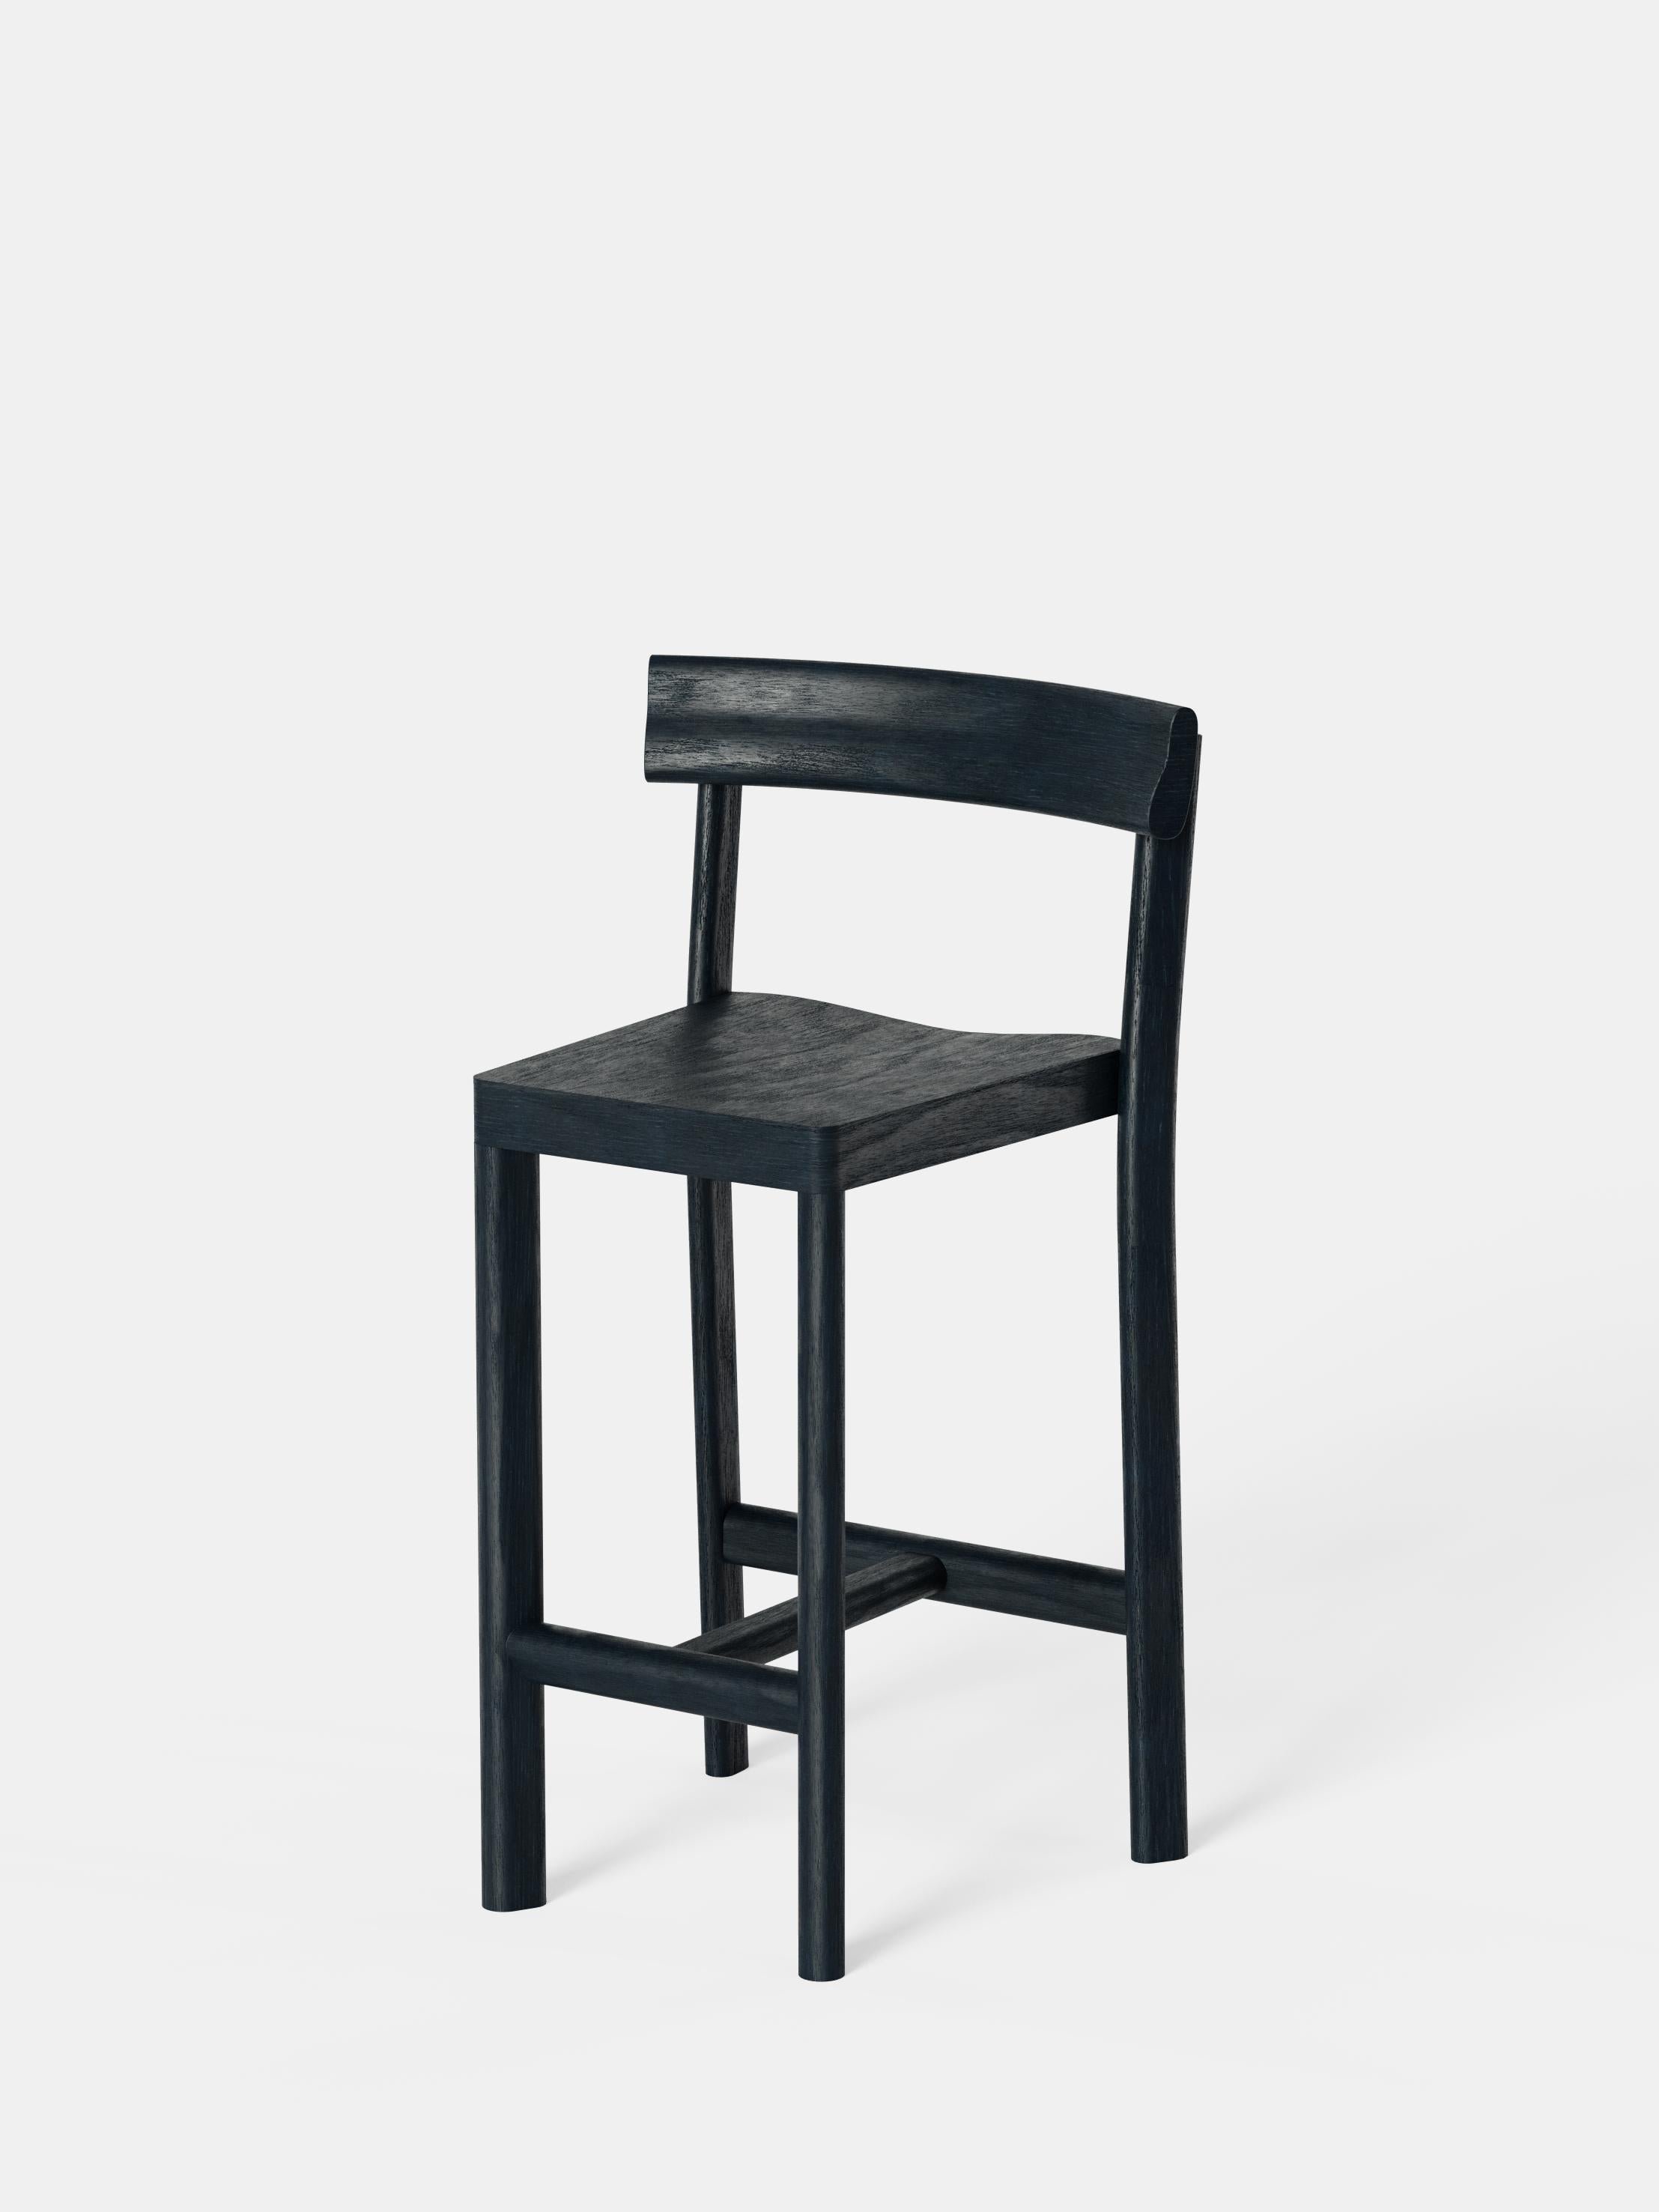 Set of 6 Galta 65 Black Oak Counter Chairs by Kann Design
Dimensions: D 50 x W 43 x H 91.5 cm.
Materials: Black lacquered oak.
Available in other colors.

The Galta counter chair is the big sister of the classic Galta chair. The base stretches and